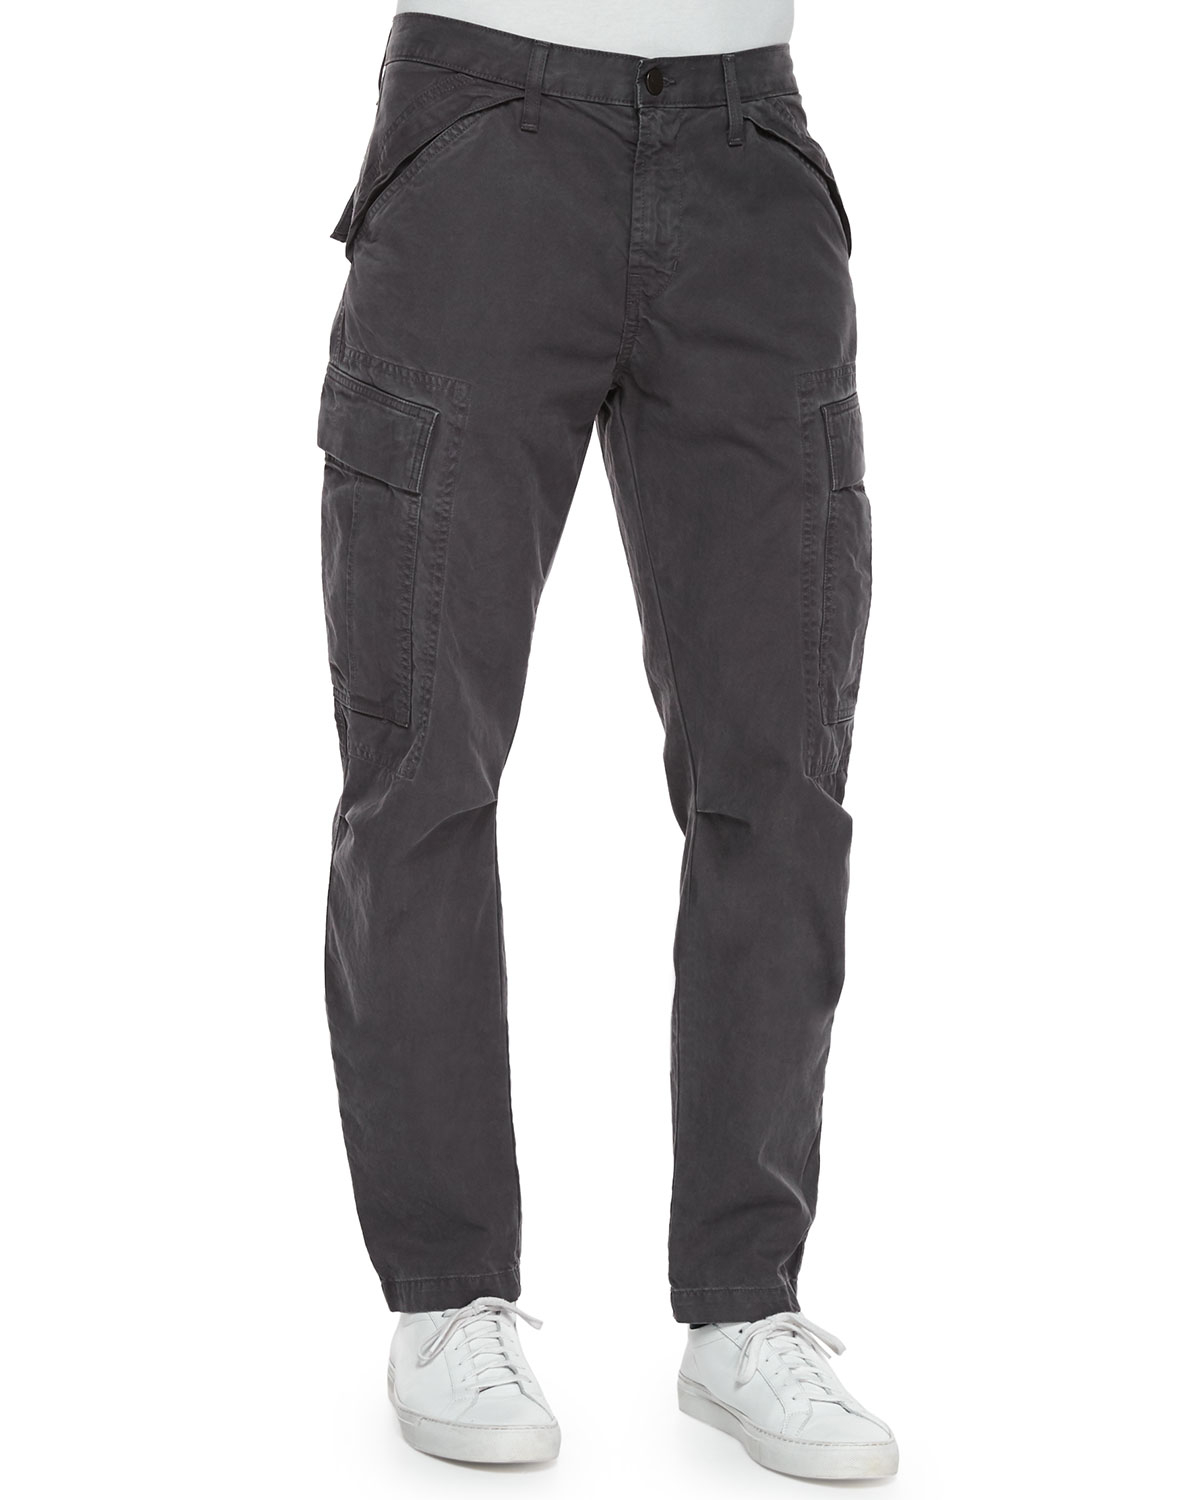 Lyst - J Brand Collins Cargo-pocket Utility Jogger Pants in Gray for Men